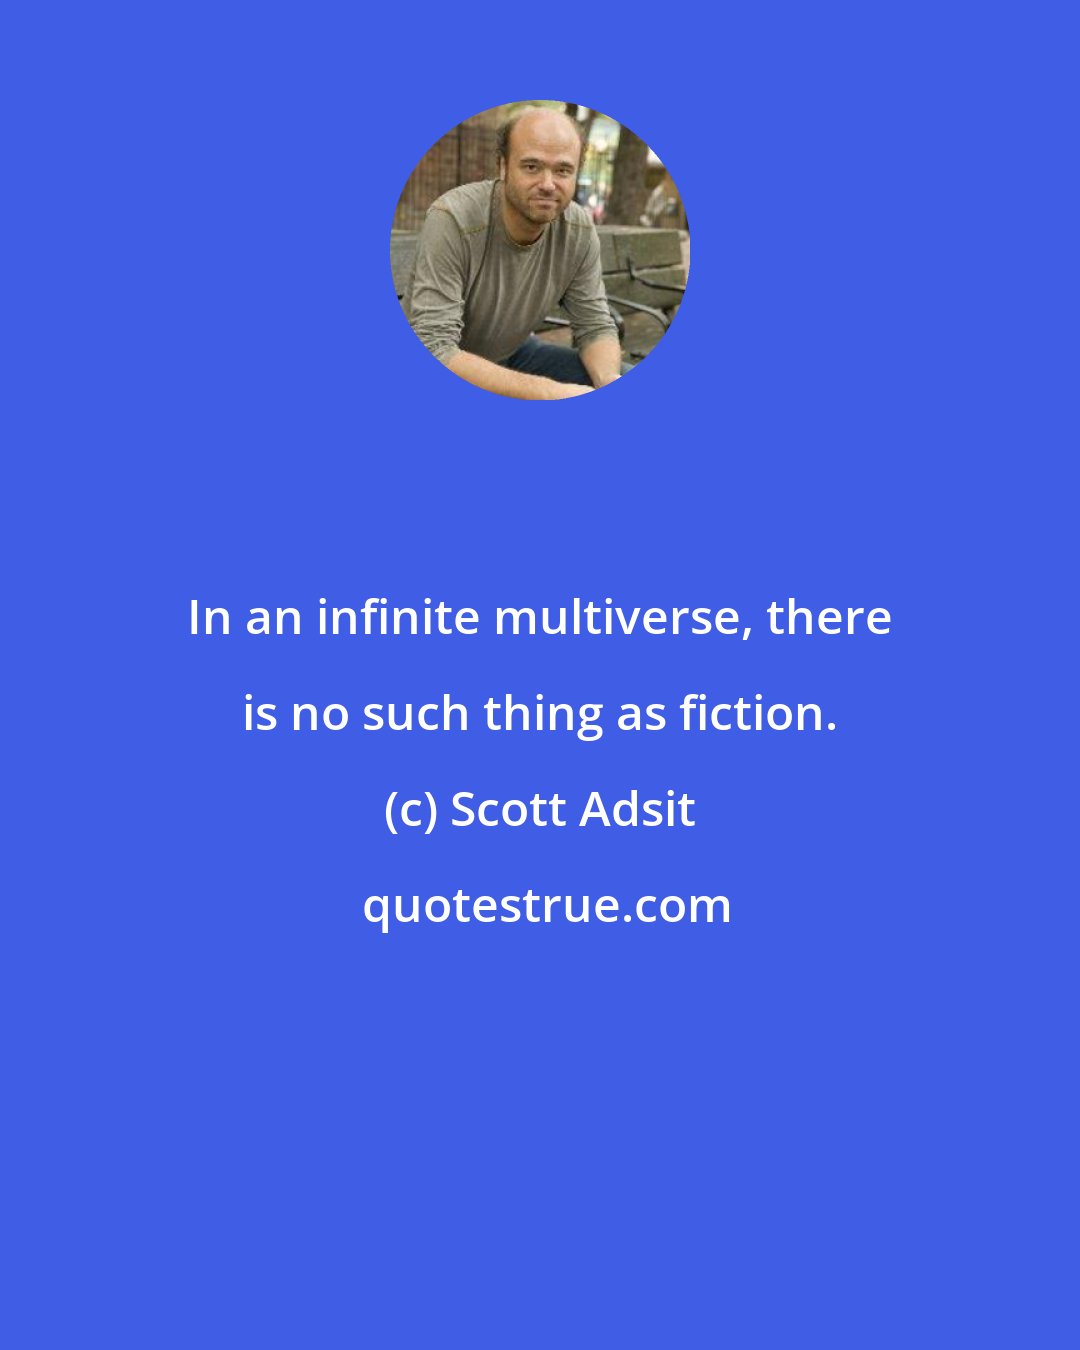 Scott Adsit: In an infinite multiverse, there is no such thing as fiction.